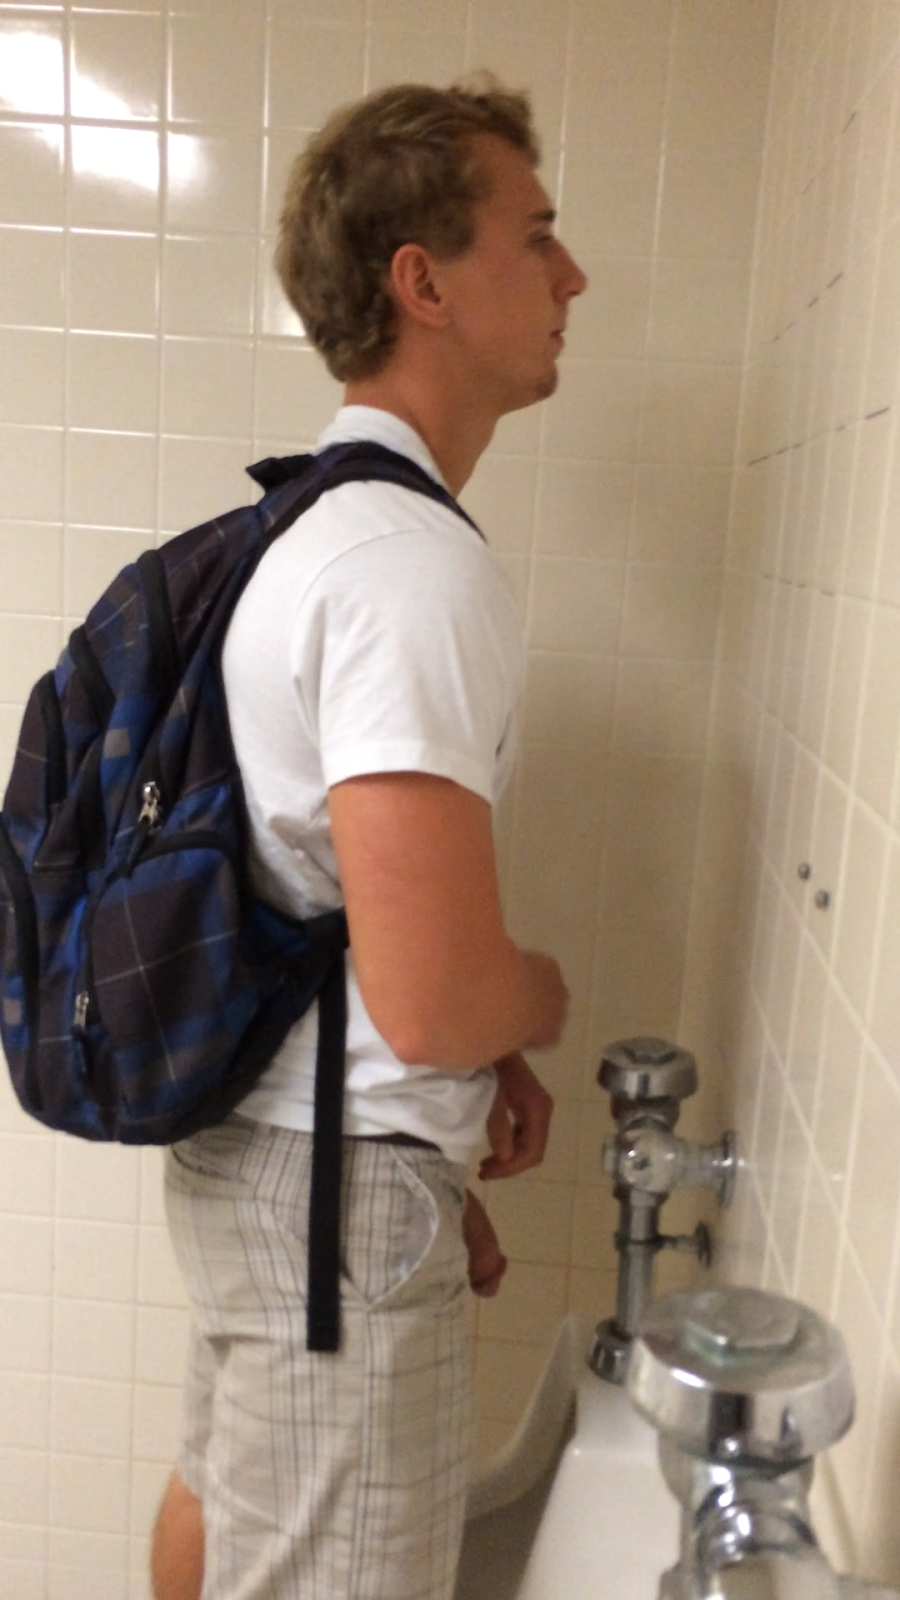 Hot teenage guys caught peeing in the urinal